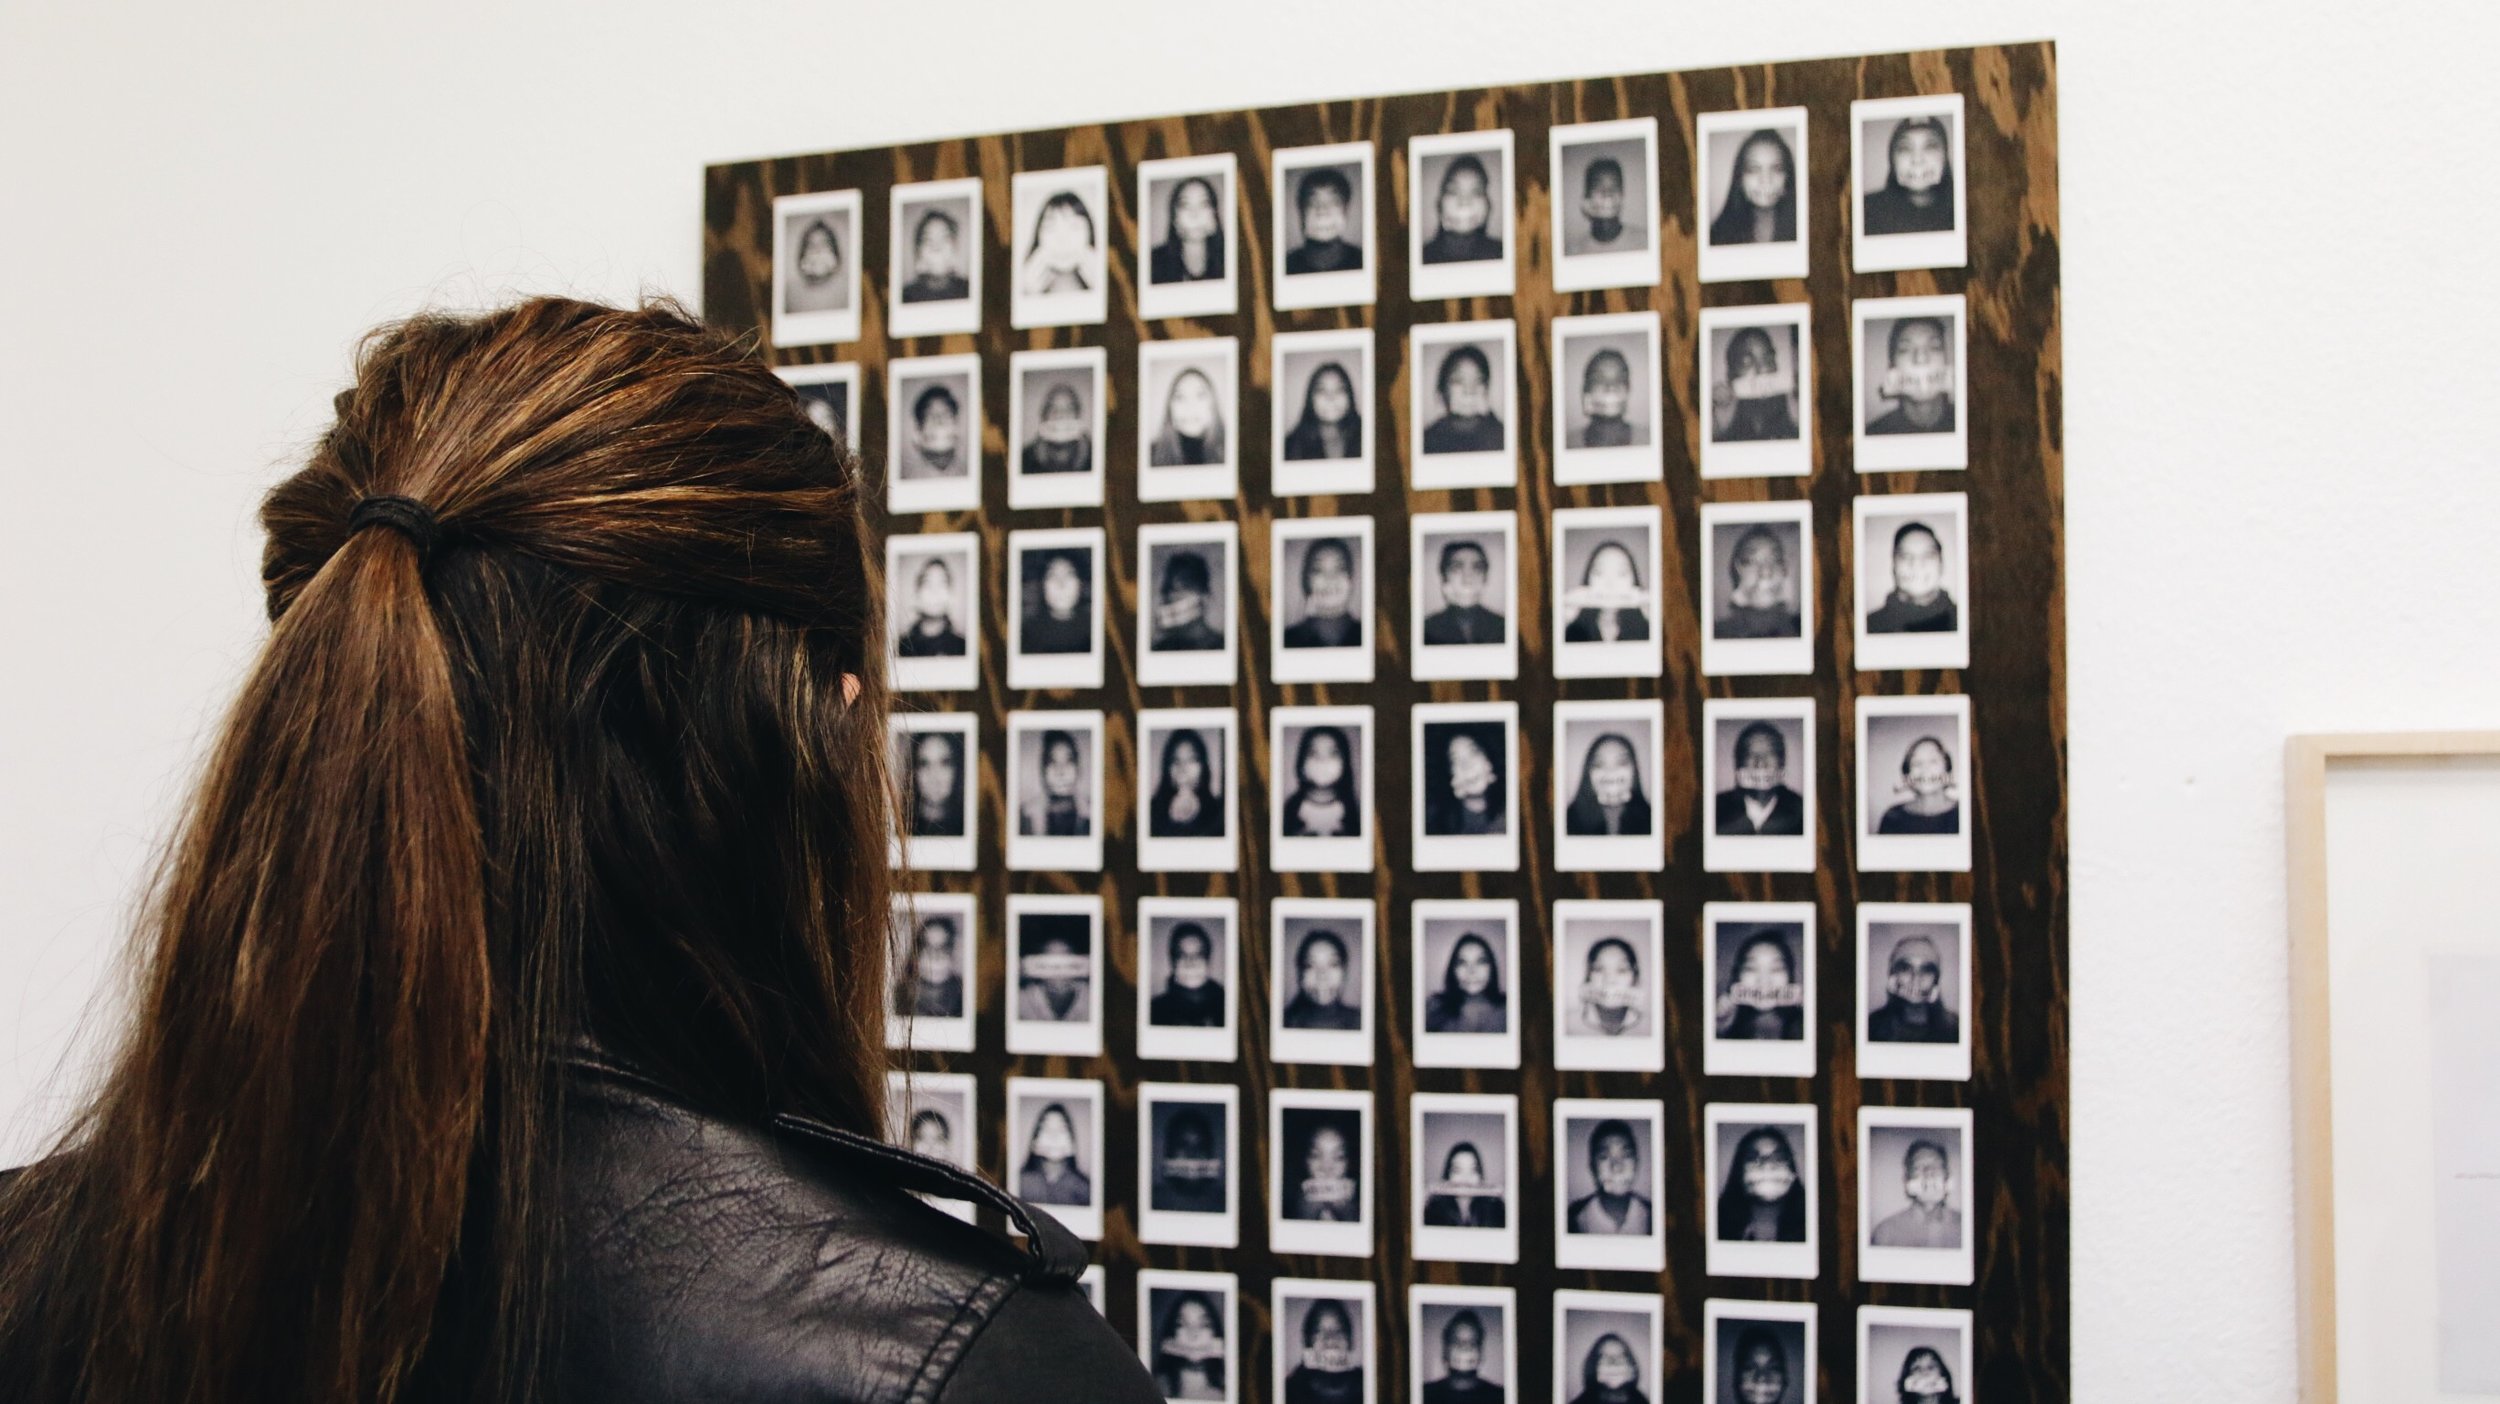 A woman looks at a series of polaroid headshots displayed as an art piece.